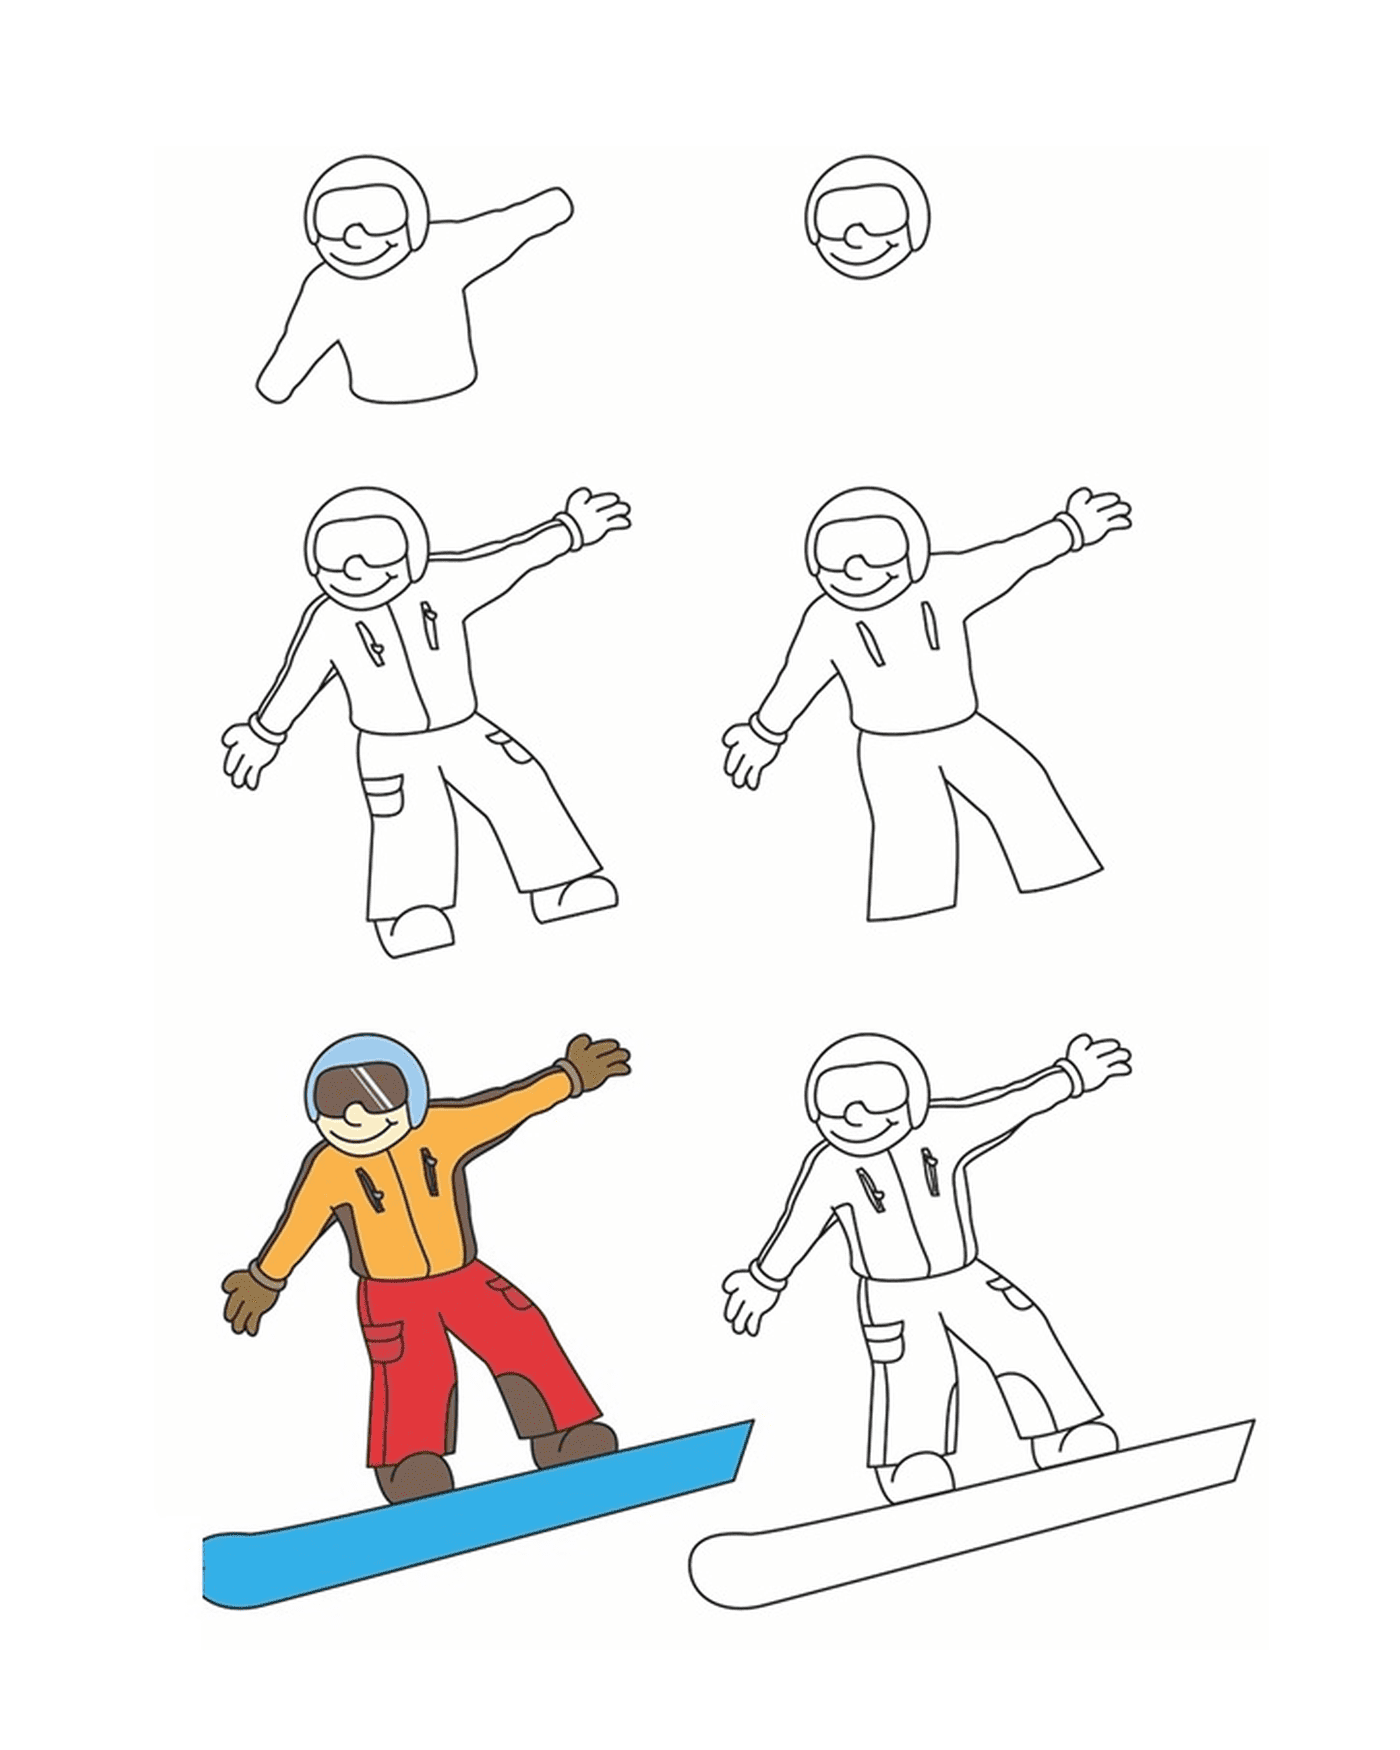  How to draw snowboarding 